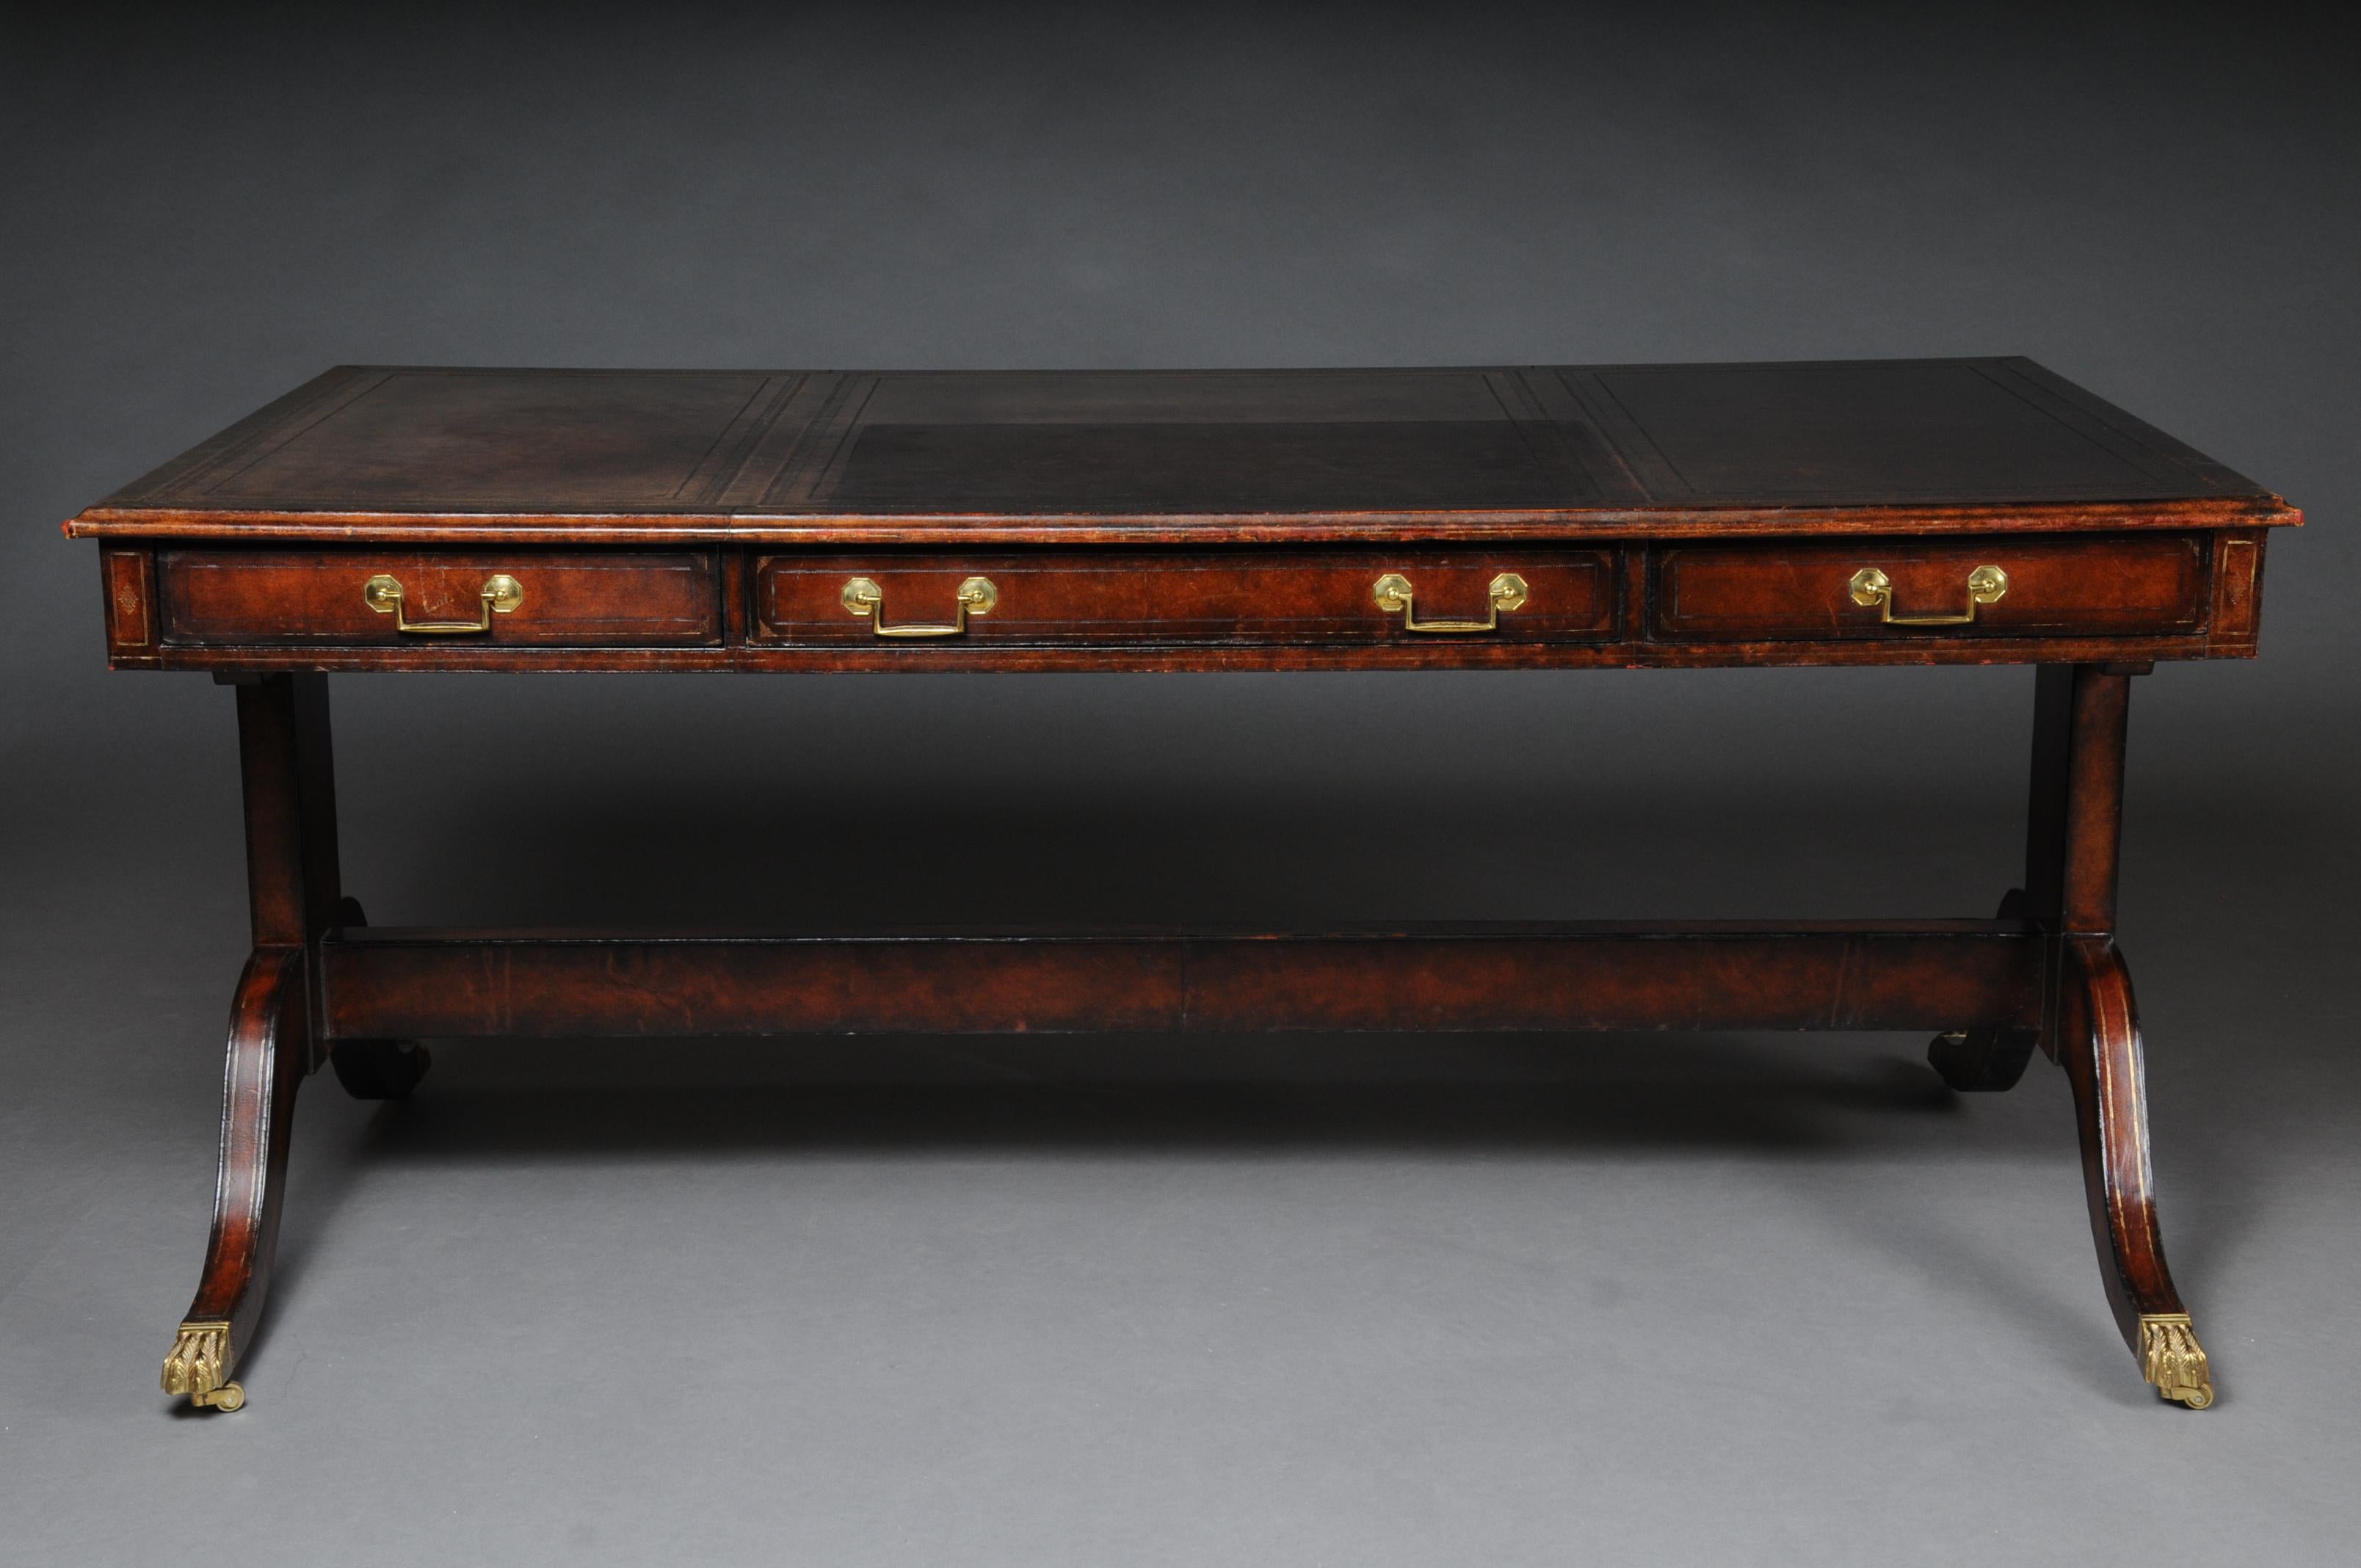 Embossed English Partner Desk, 1870 Writing Desk, Mahogany Completely Covered in Leather